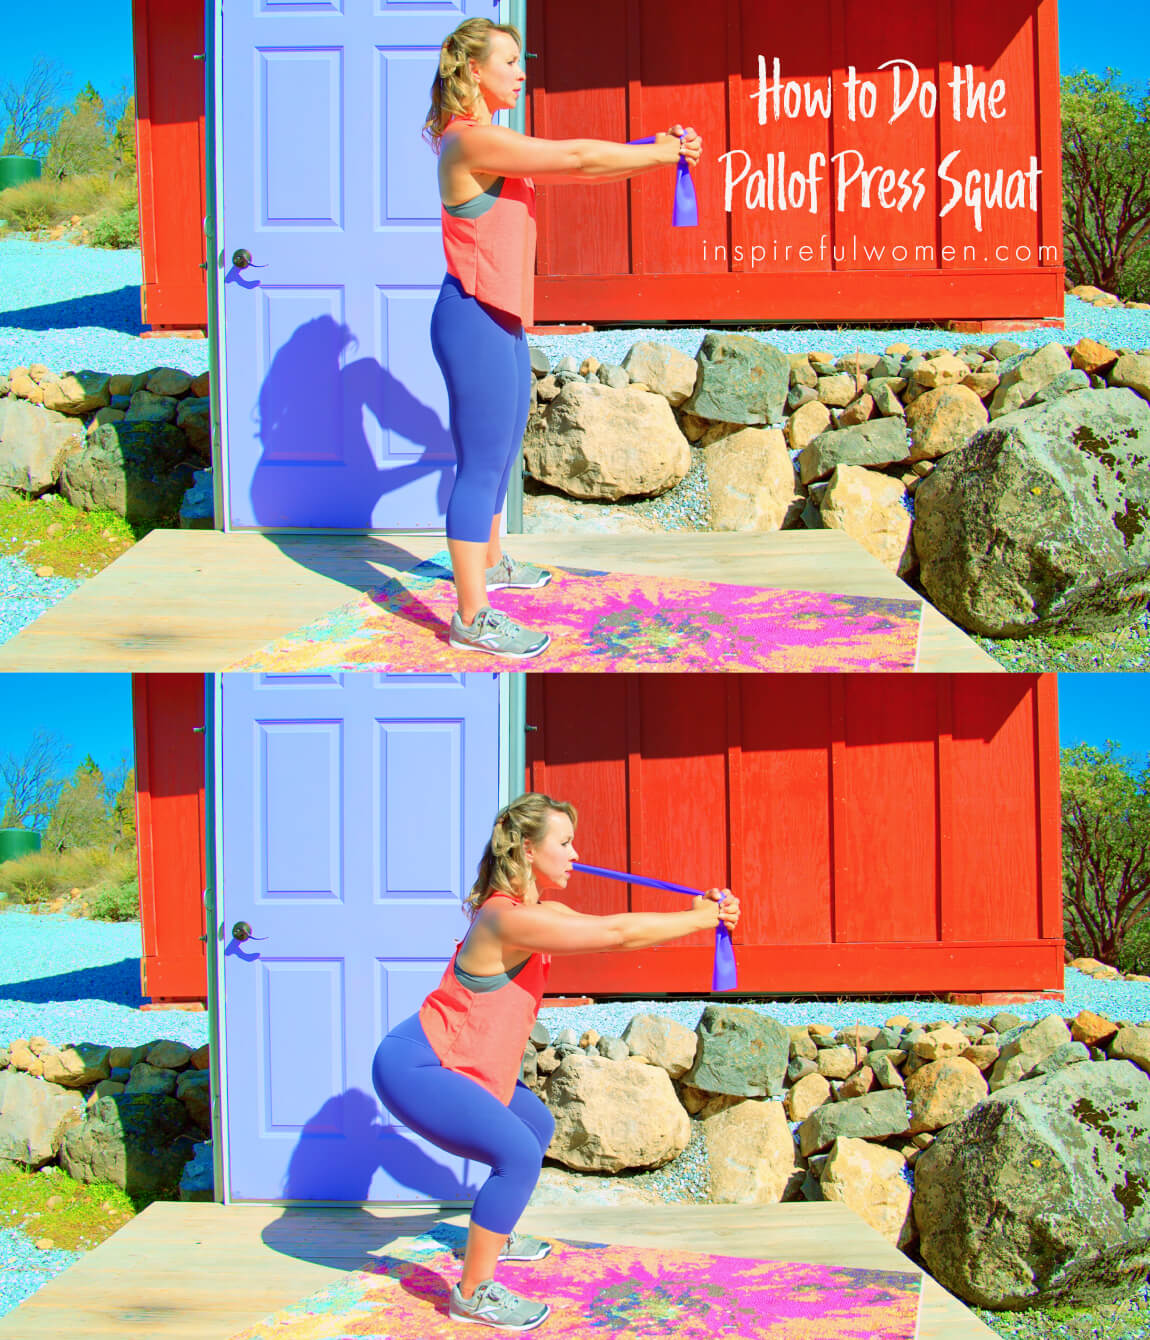 how-to-squat-pallof-hold-anti-rotation-core-press-obliques-home-workout-women-over-40